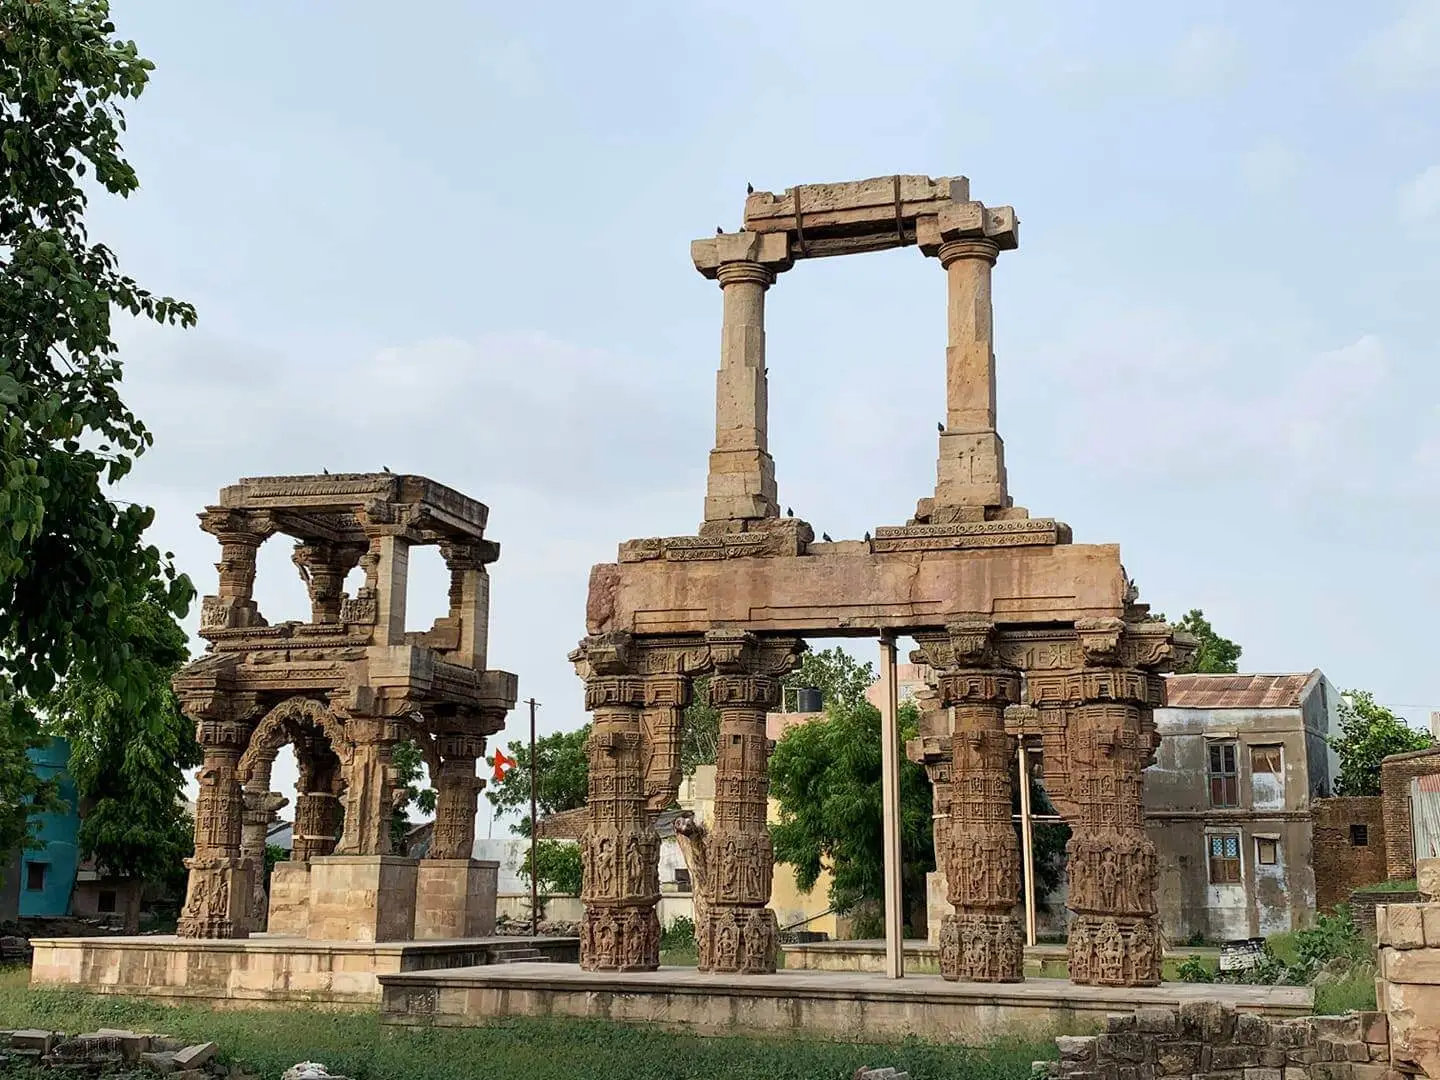 Ruins of Rudra Mahalaya Temple with some sandstone material pillars on site, this temple which was made by artisans including Suthar community during the reign of Siddharaja Jayasimha Solanki